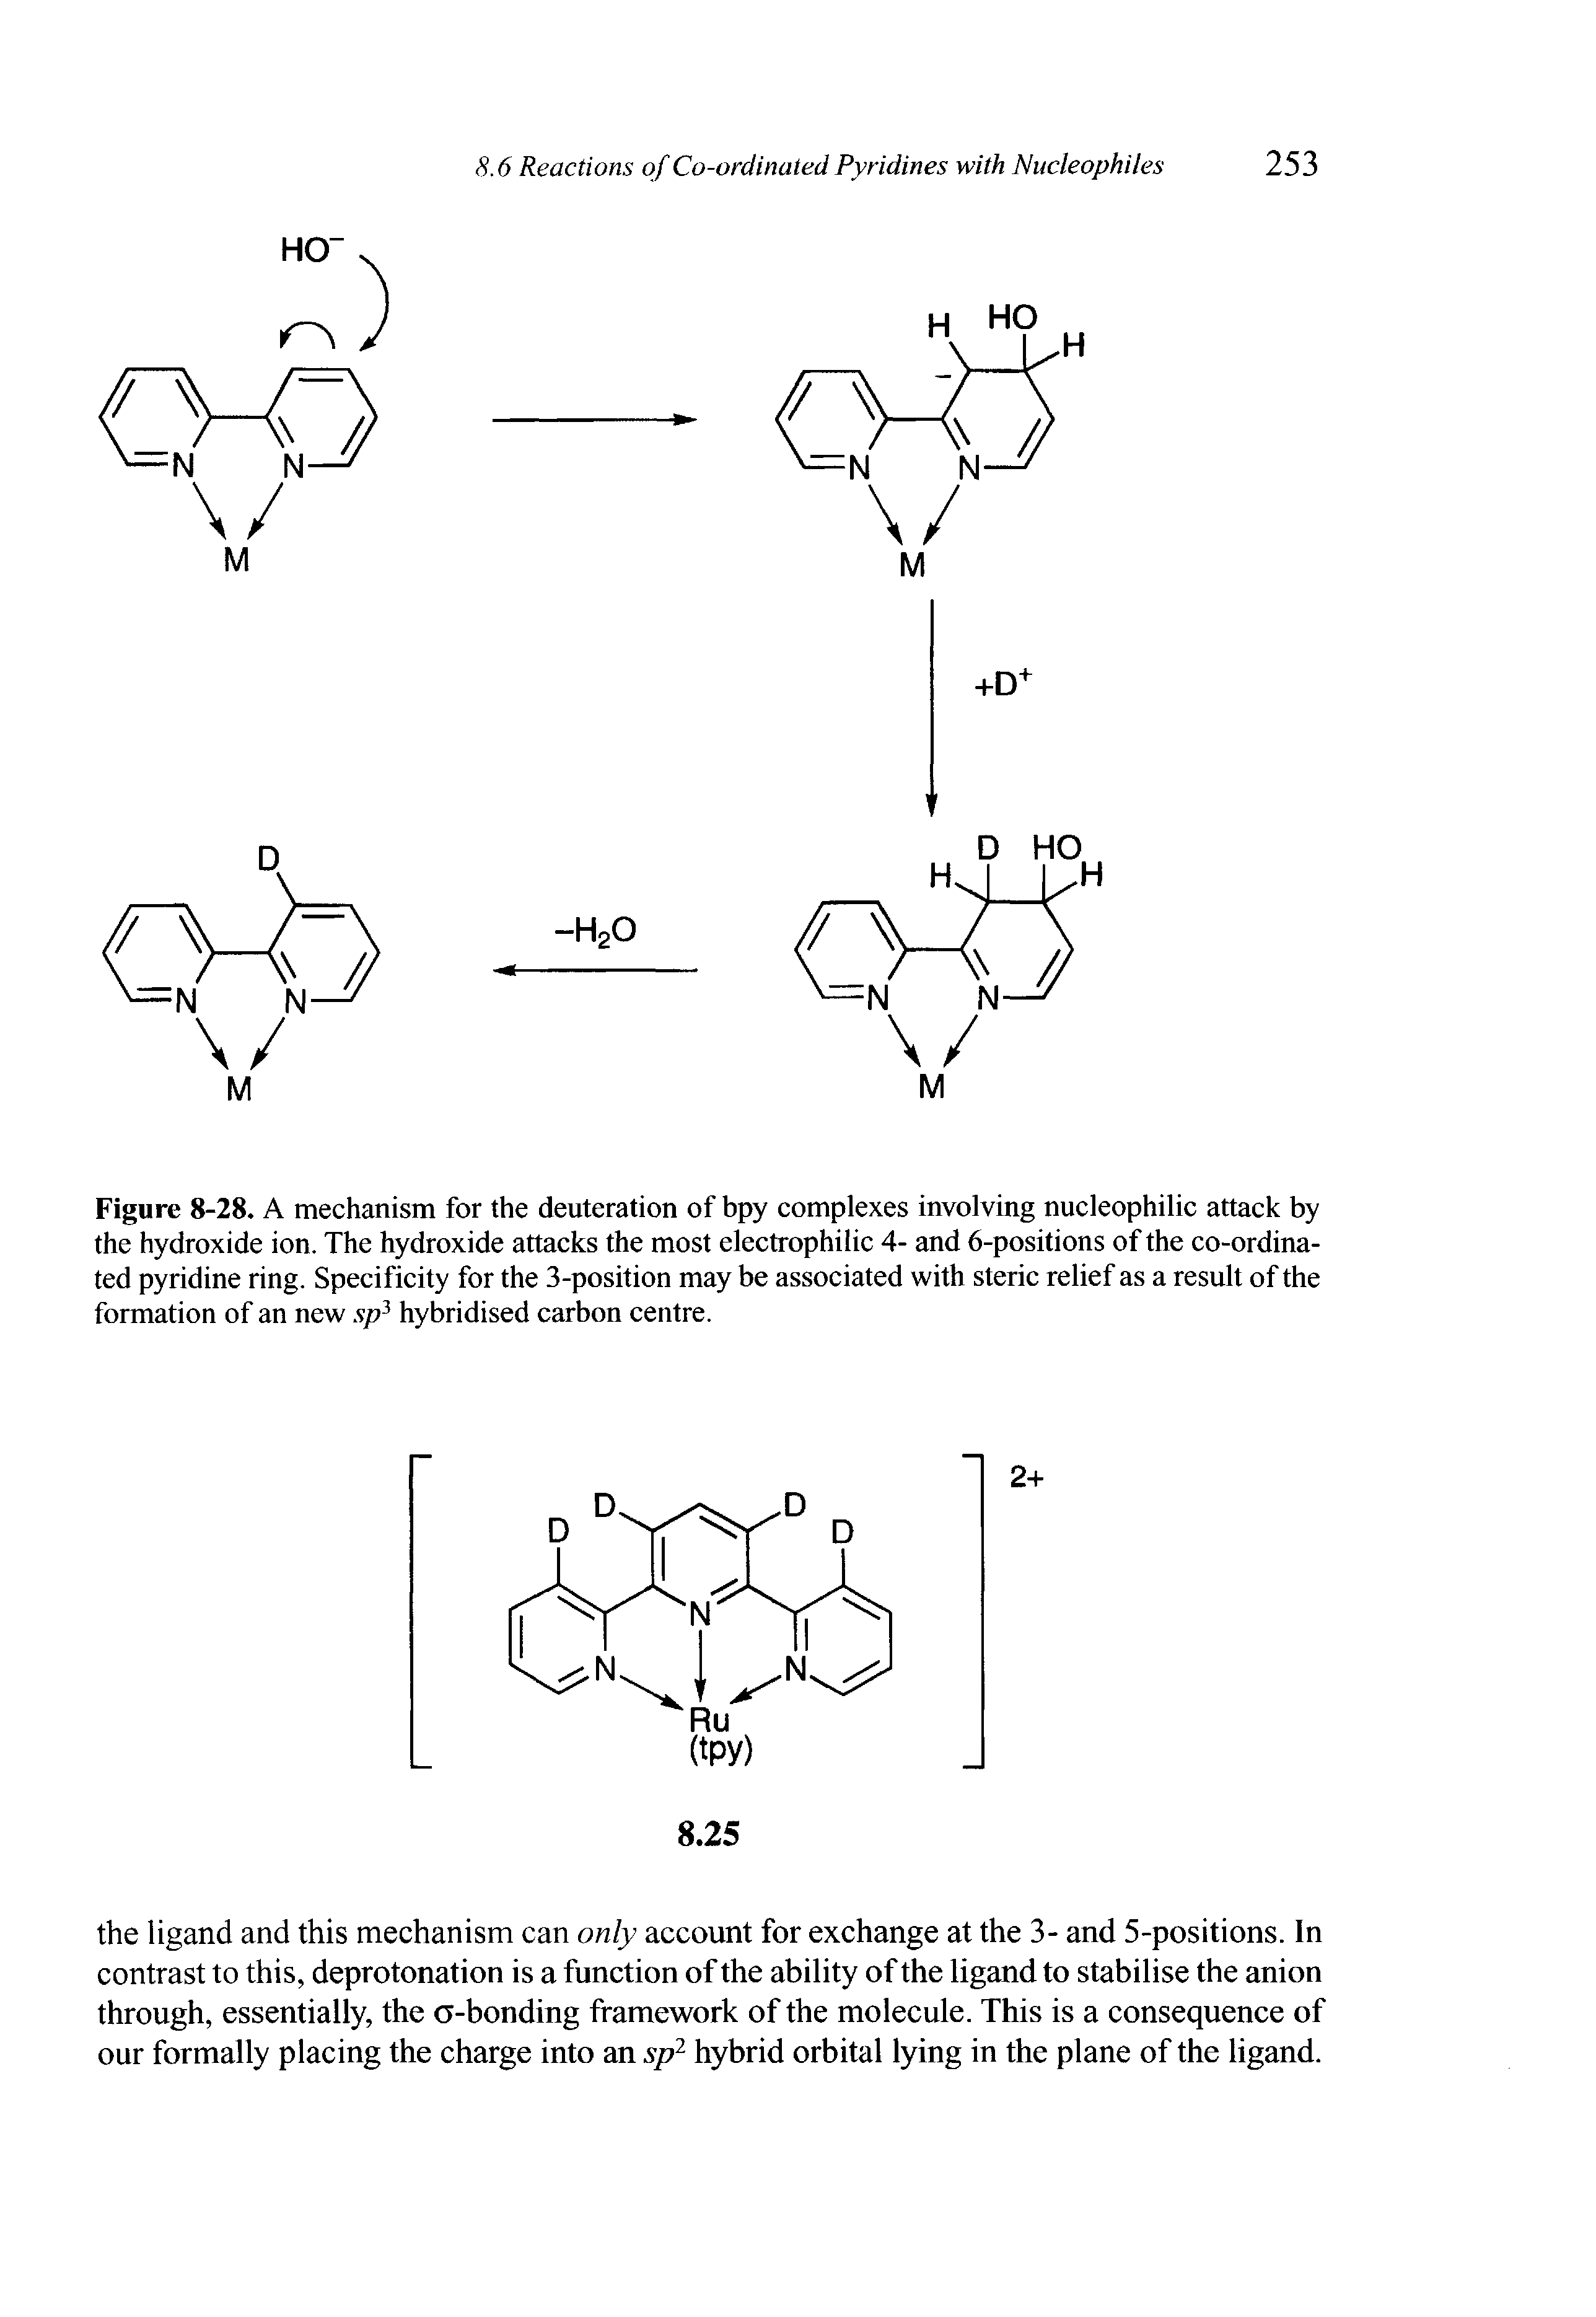 Figure 8-28. A mechanism for the deuteration of bpy complexes involving nucleophilic attack by the hydroxide ion. The hydroxide attacks the most electrophilic 4- and 6-positions of the co-ordinated pyridine ring. Specificity for the 3-position may be associated with steric relief as a result of the formation of an new sp3 hybridised carbon centre.